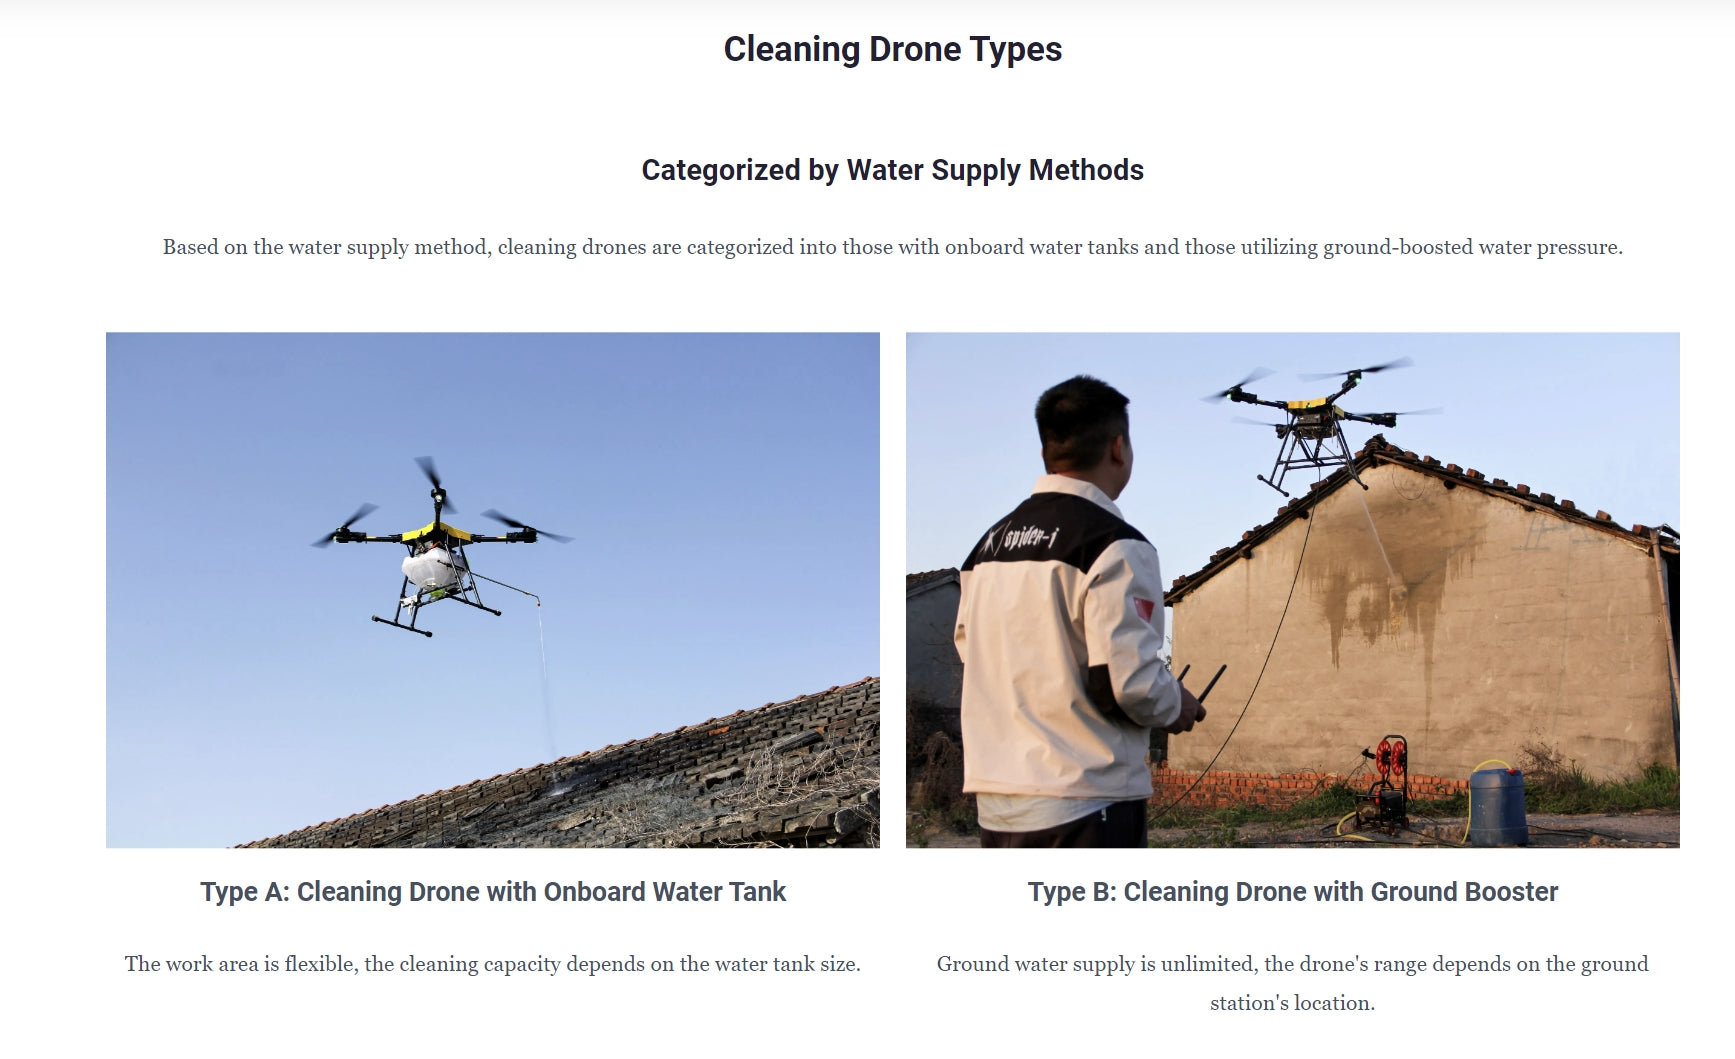 RCDrone, cleaning drones are categorized into those with onboard water tanks and those 'utilizing ground